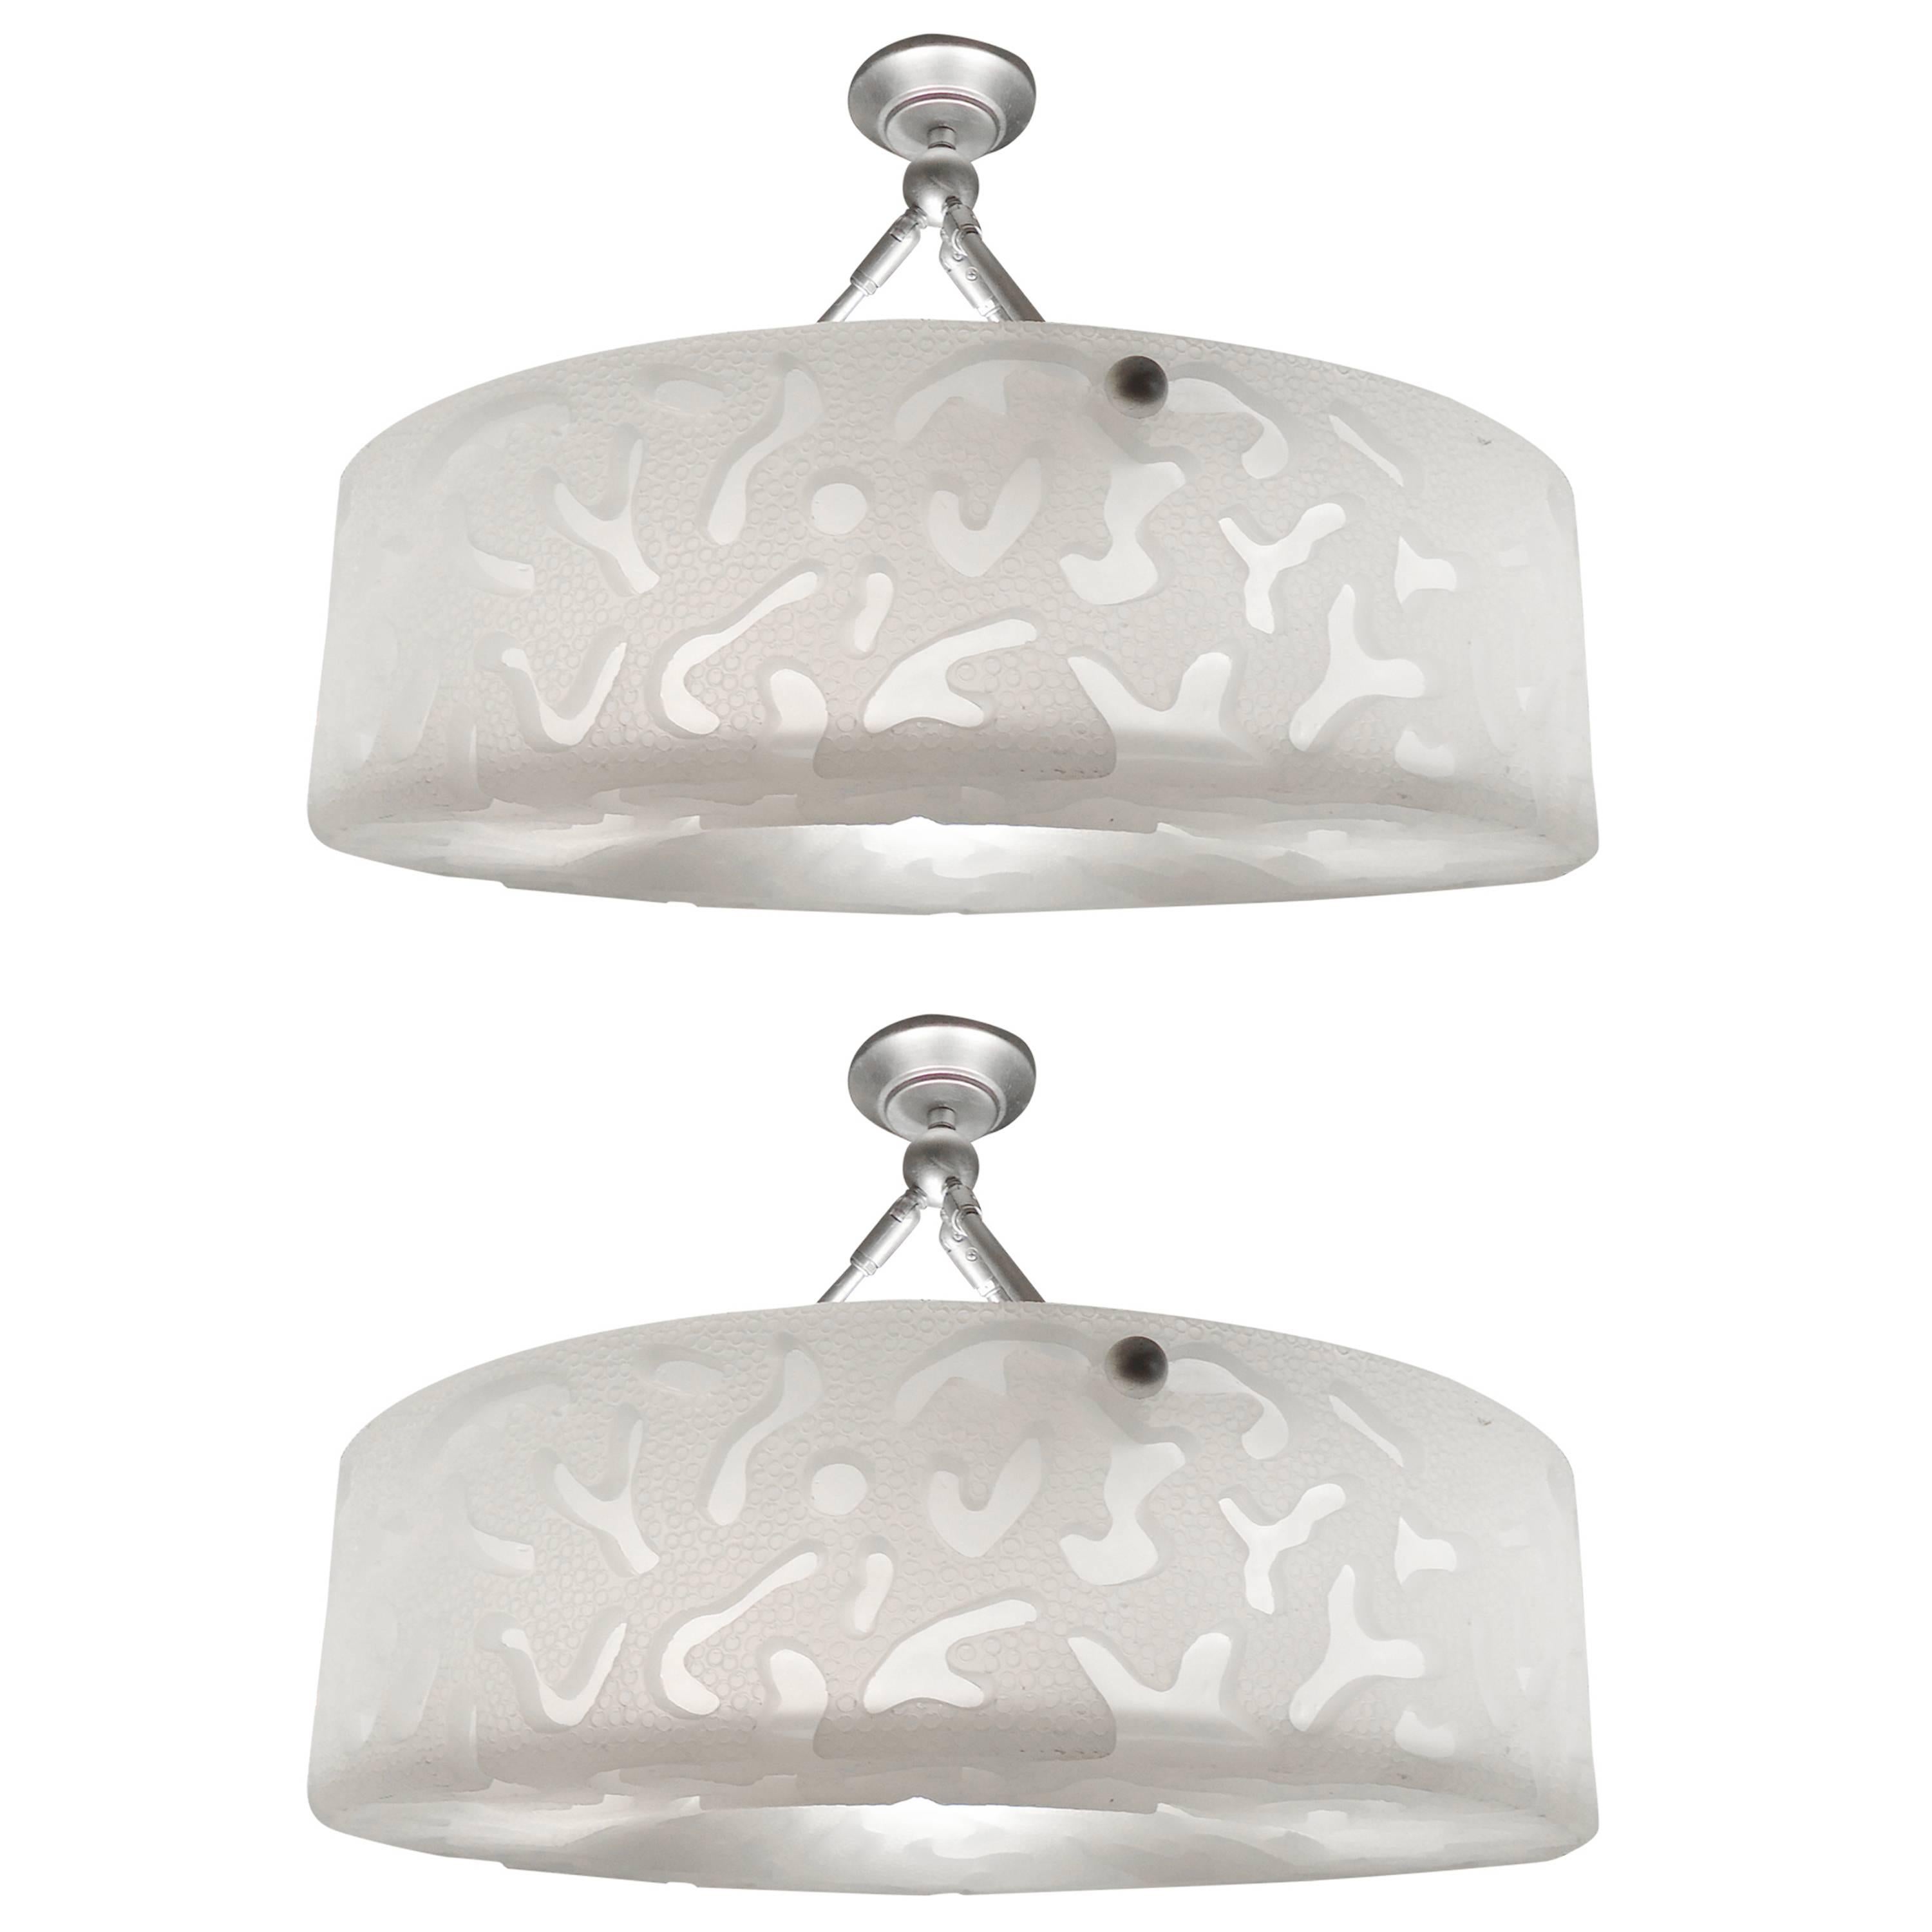 Pair of Textured Lucite Chandeliers